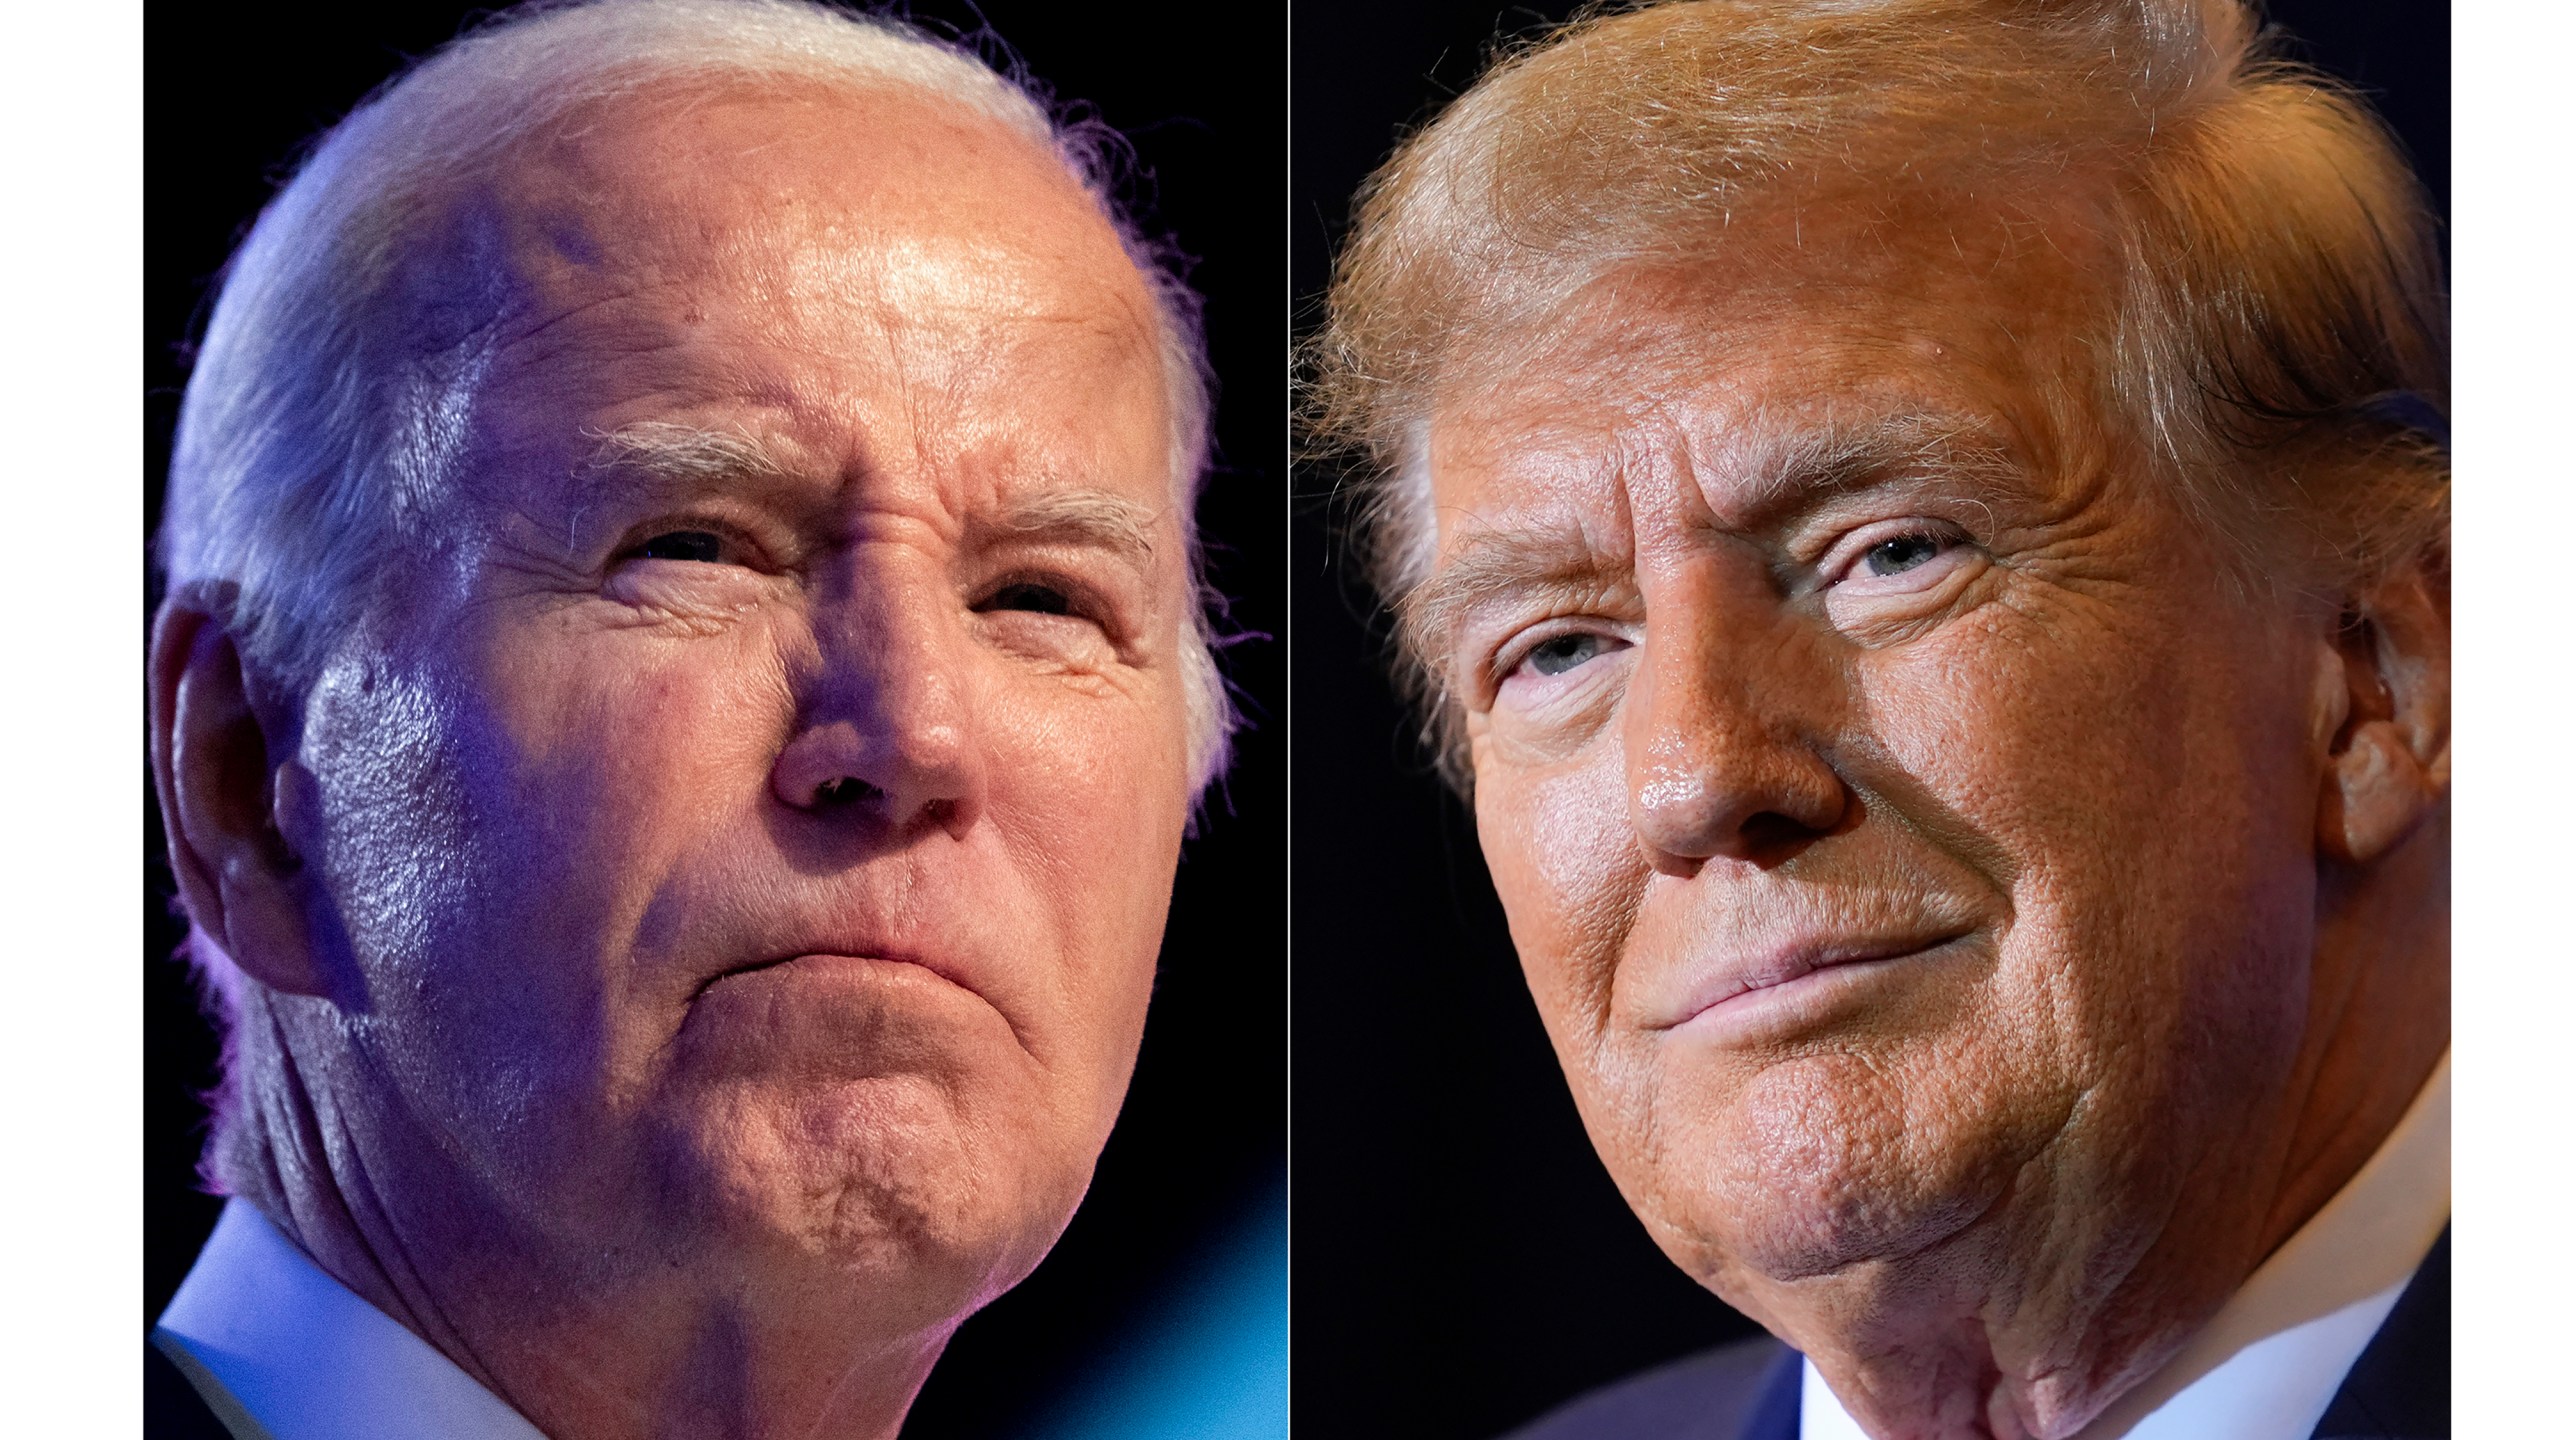 FILE - This combo image shows President Joe Biden, left, Jan. 5, 2024, and Republican presidential candidate former President Donald Trump, right, Jan. 19, 2024. Biden and Trump hope to clinch their parties' presidential nominations with dominant victories in a slate of low-profile state primaries as the 2024 fight for the White House lurches into a new phase. (AP Photo, File)